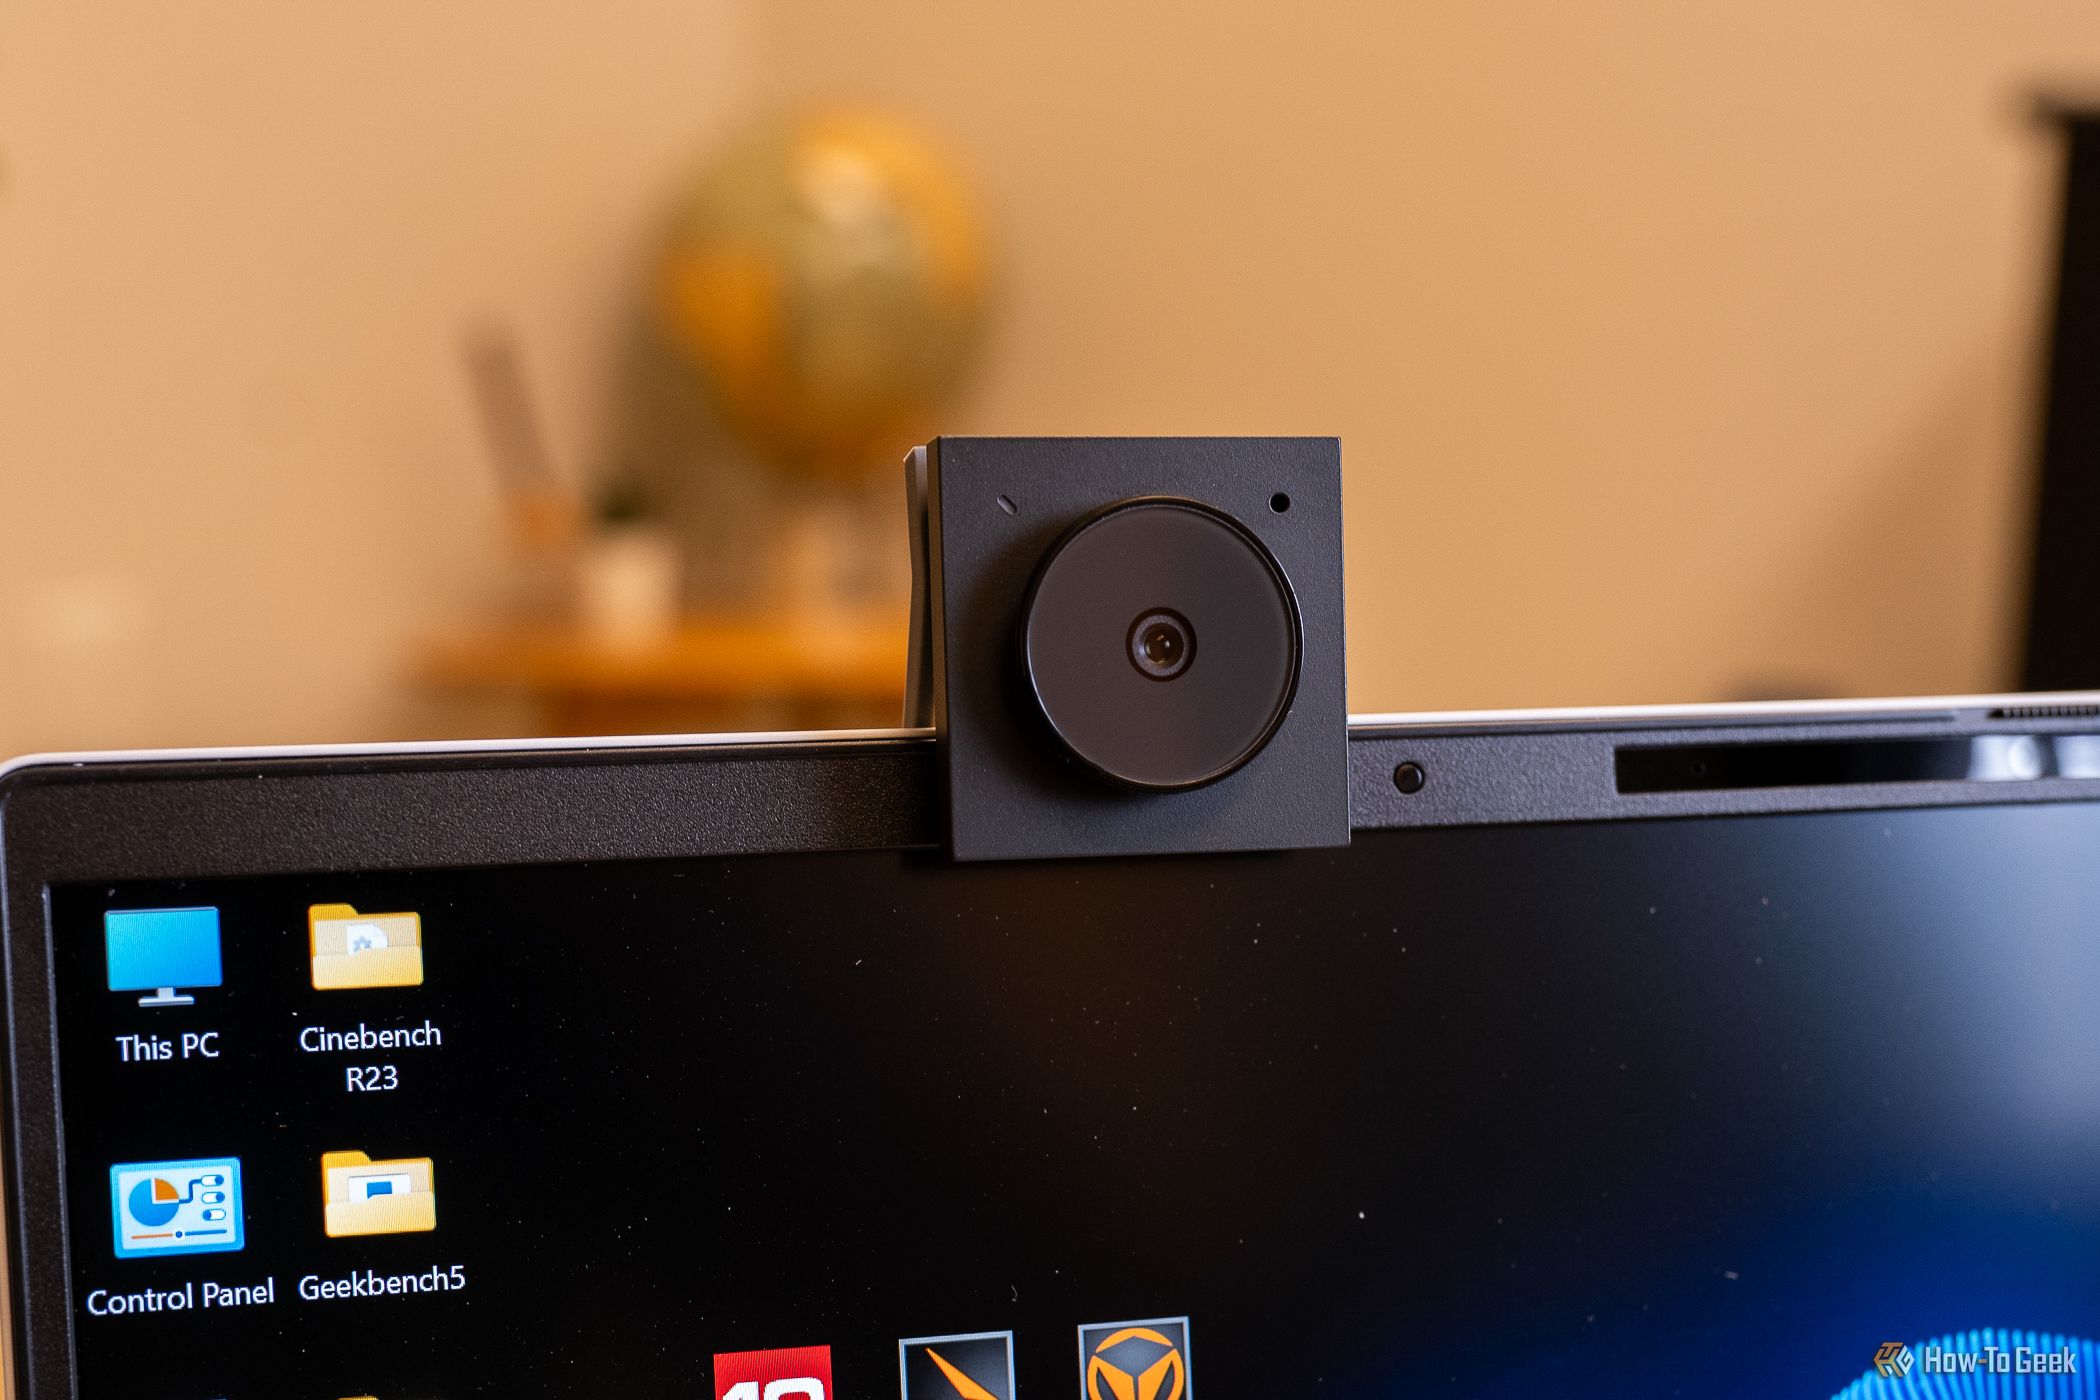 The Opal Tadpole Webcam mounted to a laptop